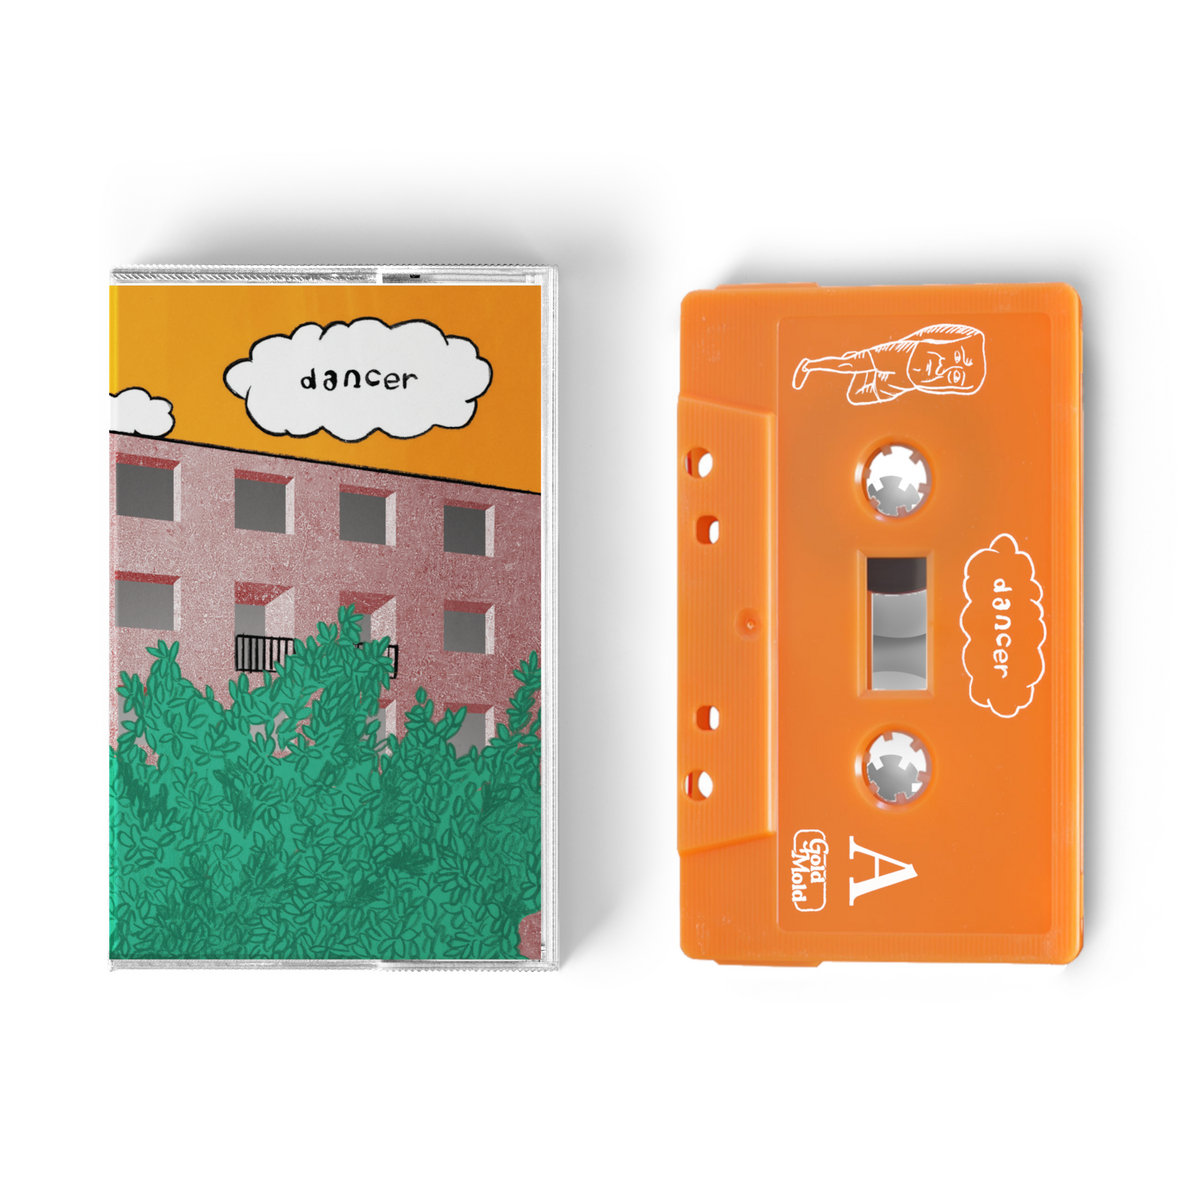 Orange Shell Variant of 'Dancer As Well' cassette available now >>> goldmoldrecords.bandcamp.com/album/as-well